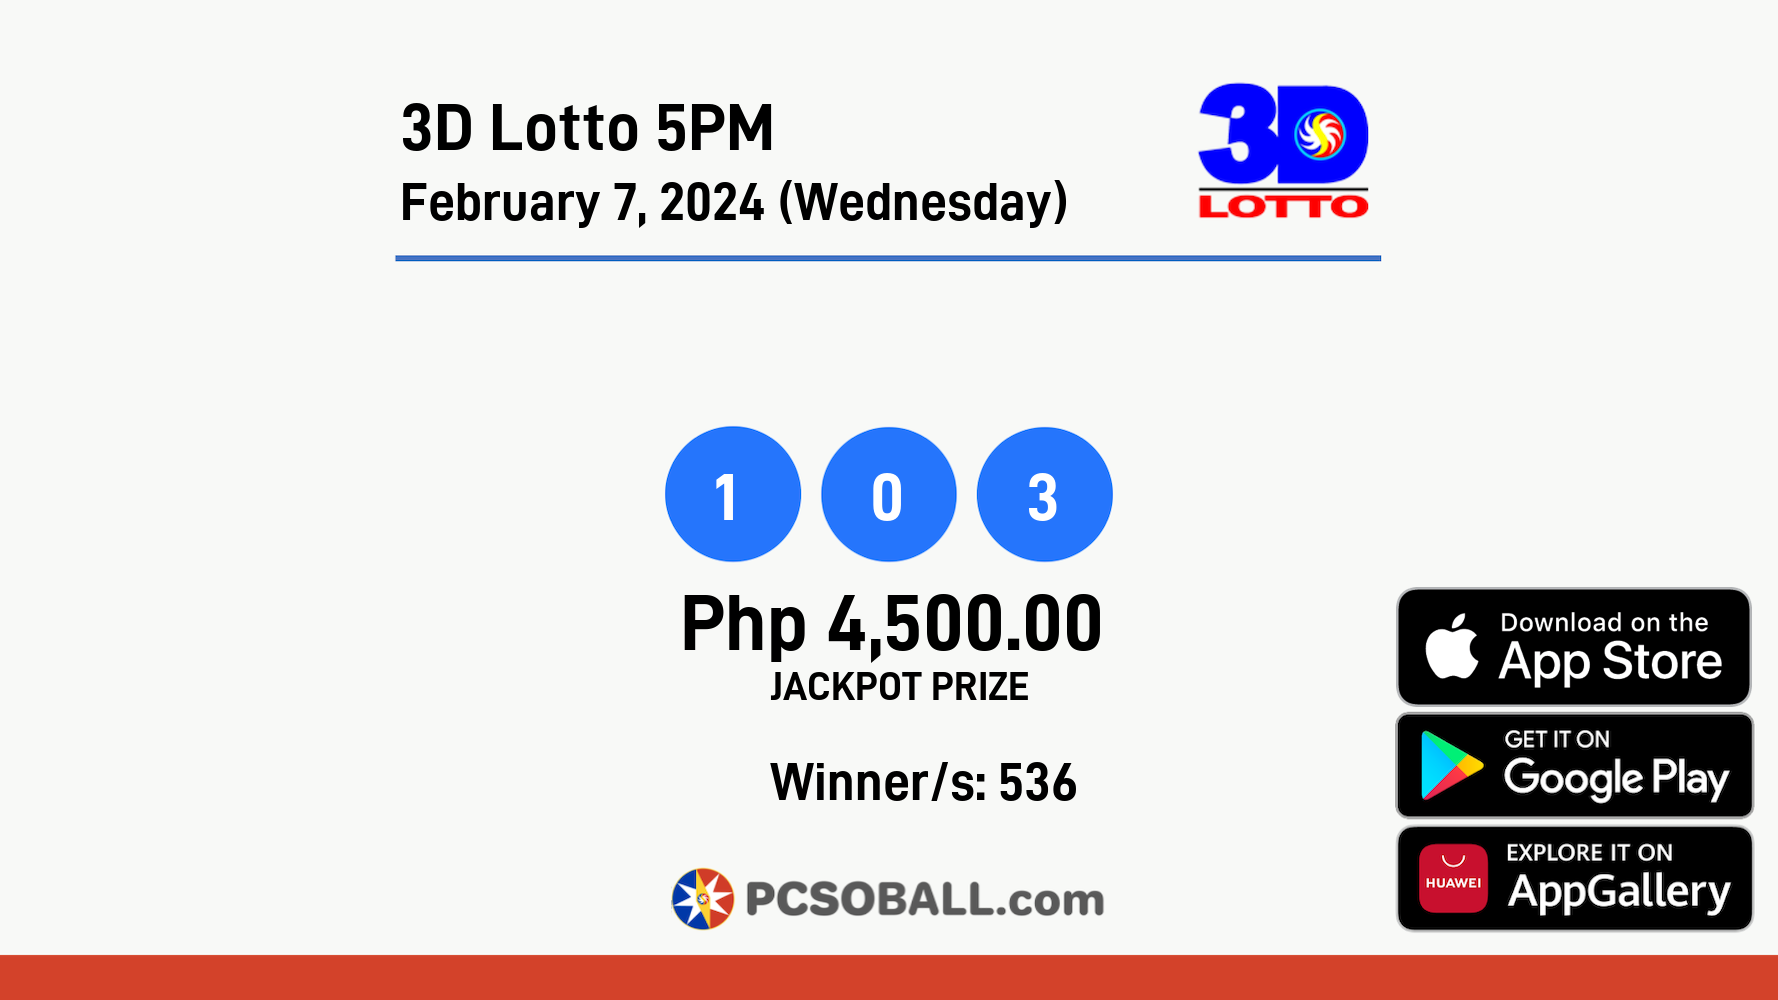 3D Lotto 5PM February 7, 2024 (Wednesday) Result